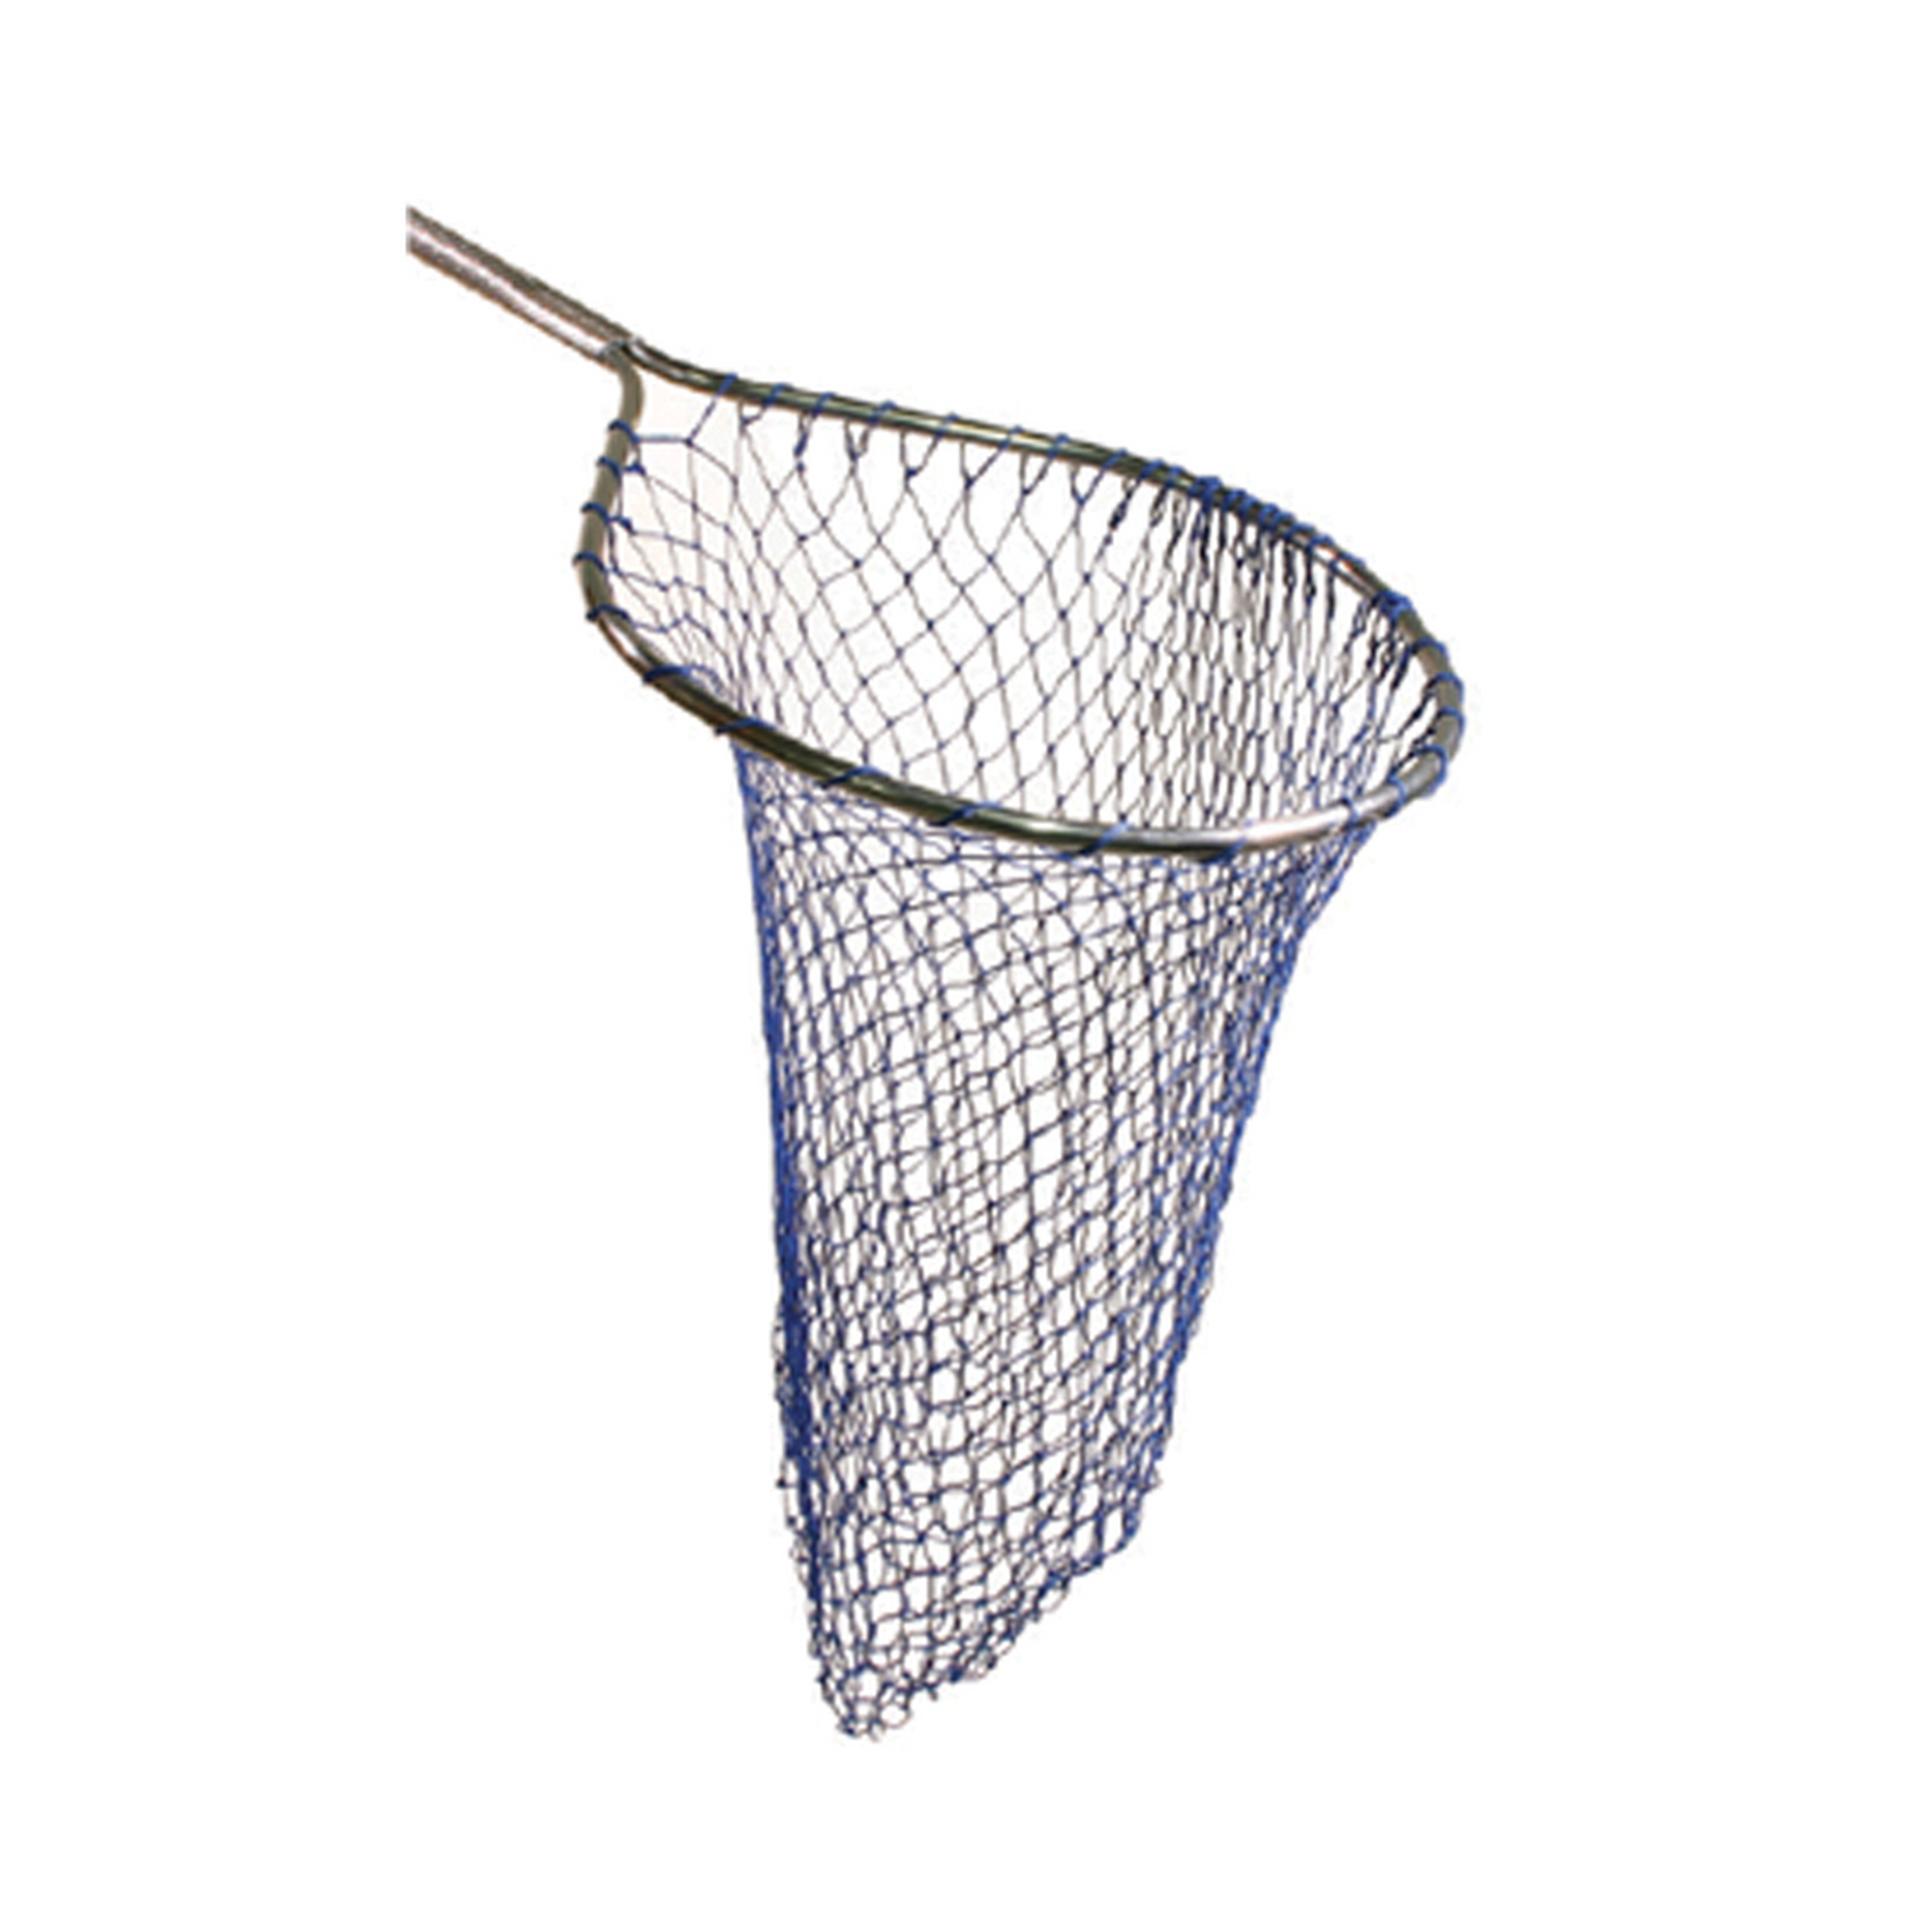 Buy Frabill Conservation Series Landing Net with Camlock Reinforced Handle,  20 X 23-Inch by Frabill Online at Low Prices in India 